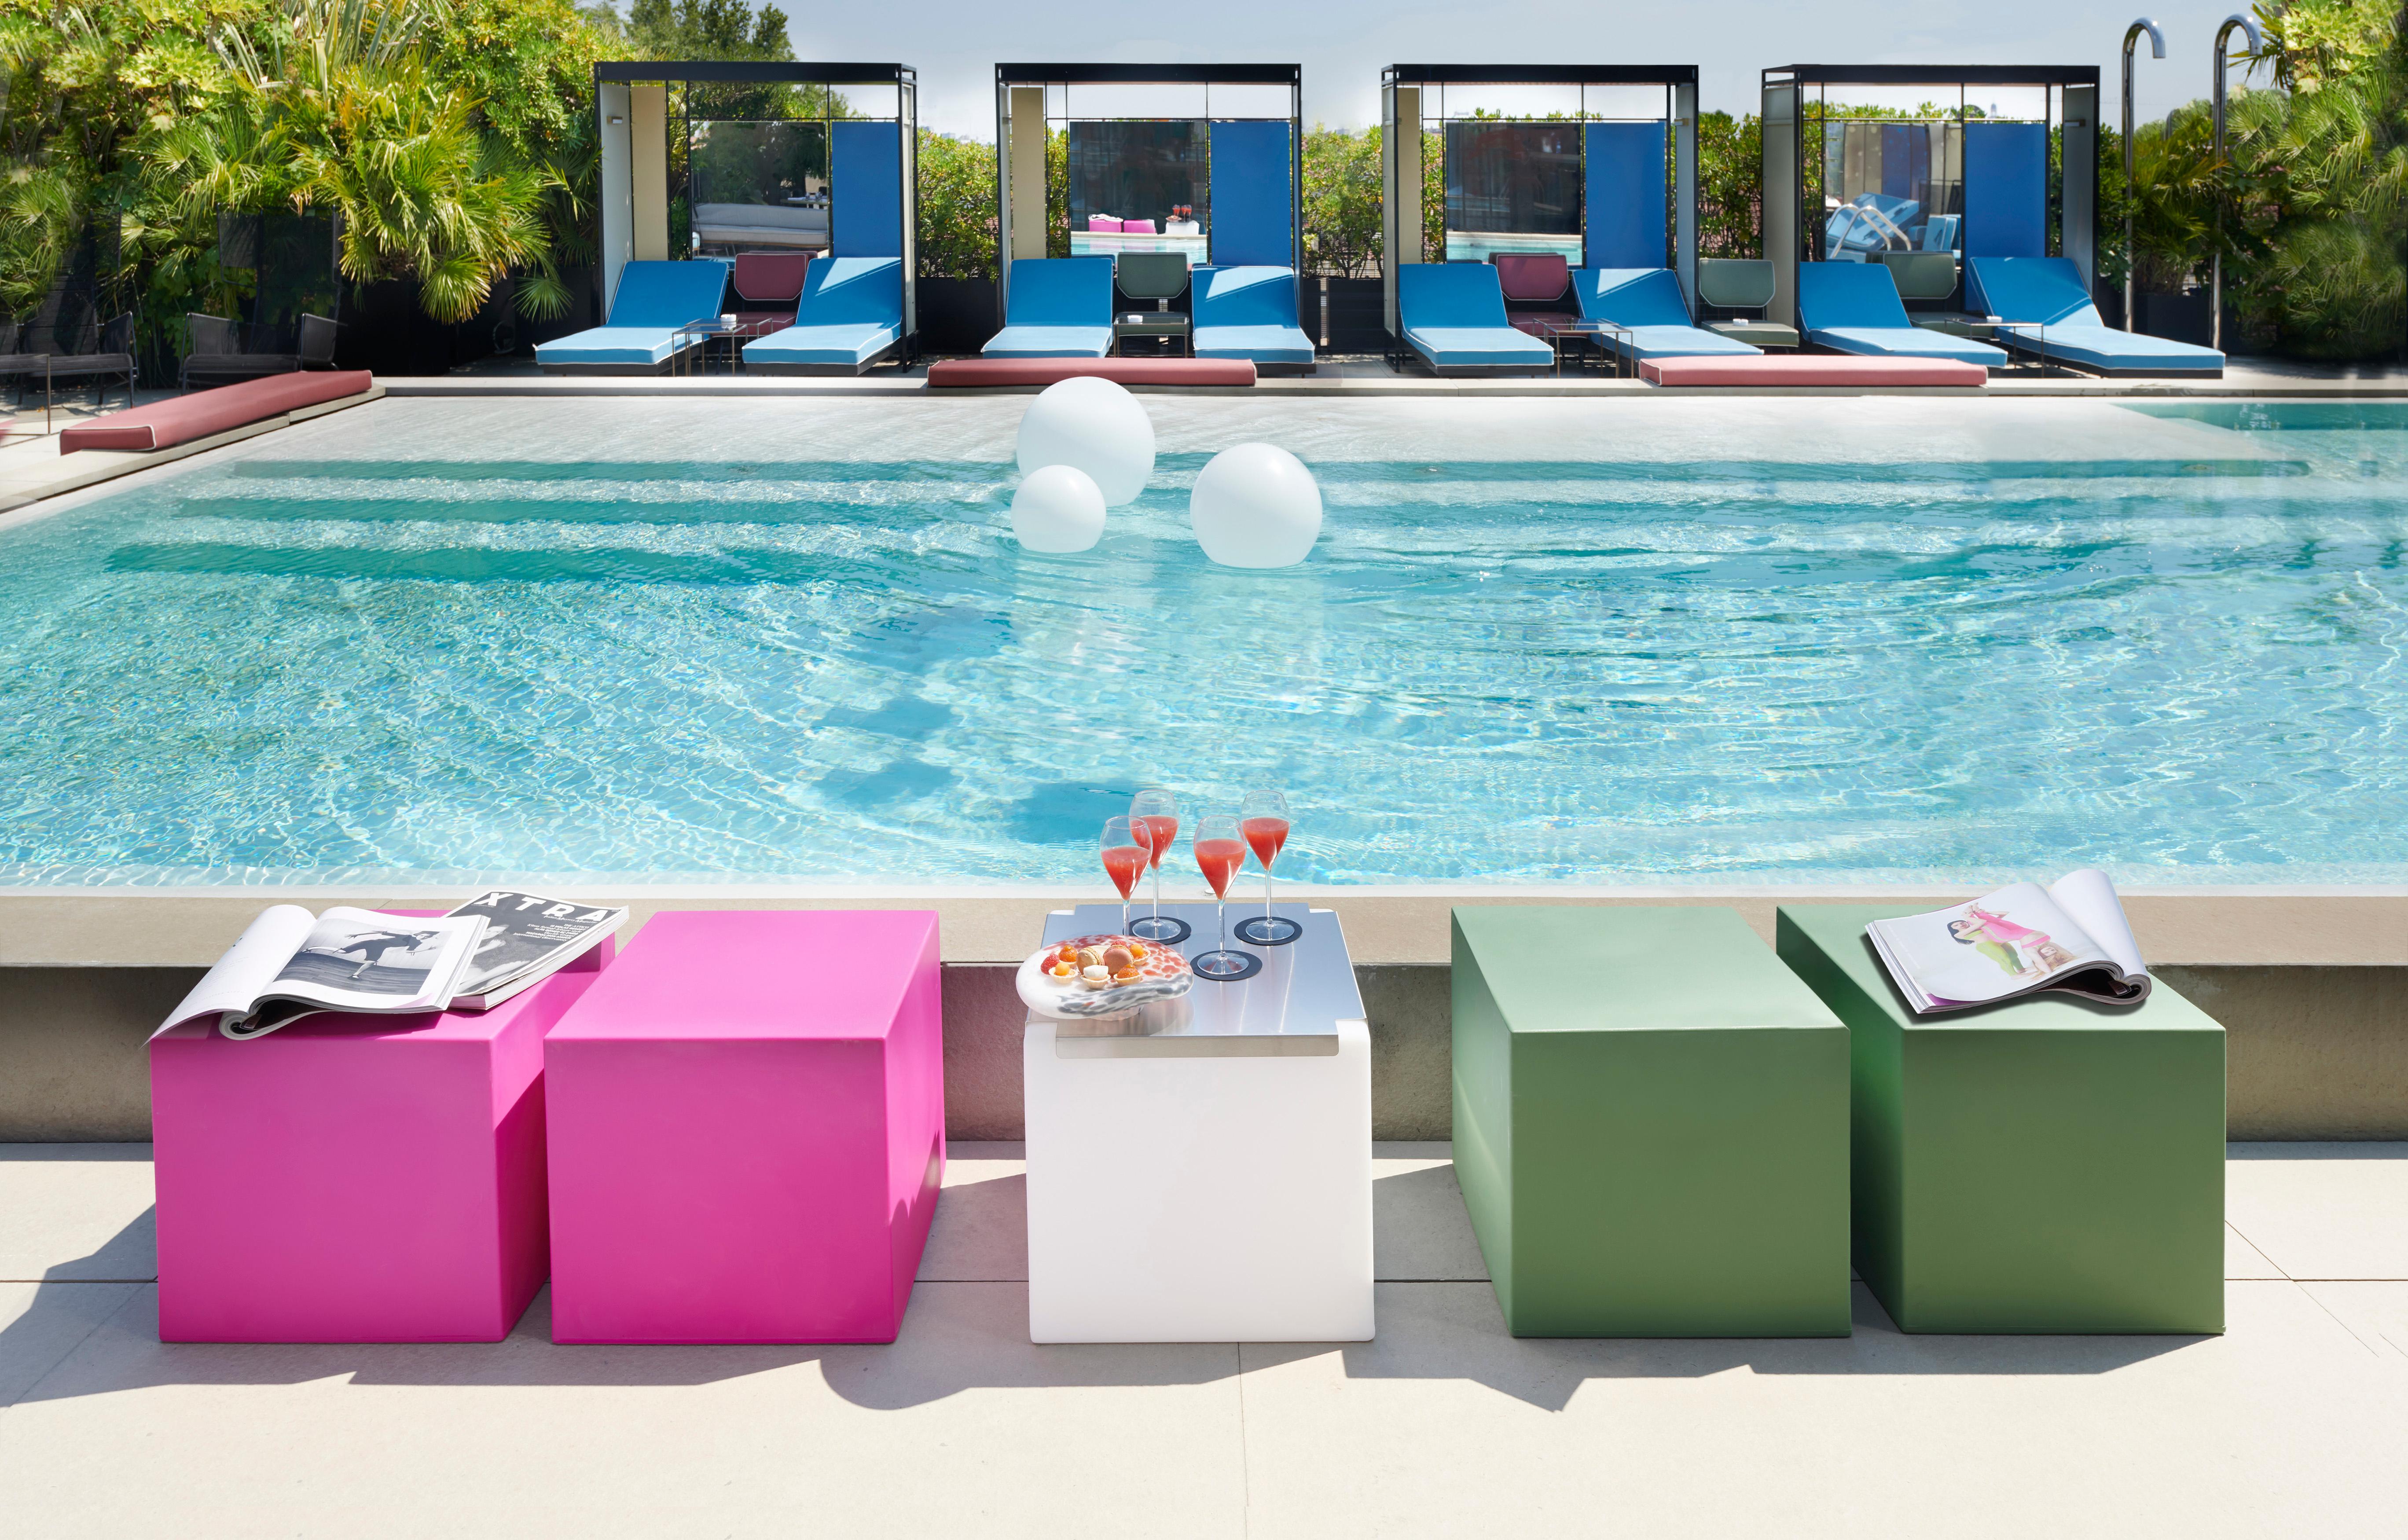 Powder Blue Cubo Pouf Stool by SLIDE Studio
Dimensions: D 43 x W 43 x H 43 cm. 
Materials: Polyethylene.
Weight: 4 kg.

Available in different color options. This product is suitable for indoor and outdoor use. Available in different versions: